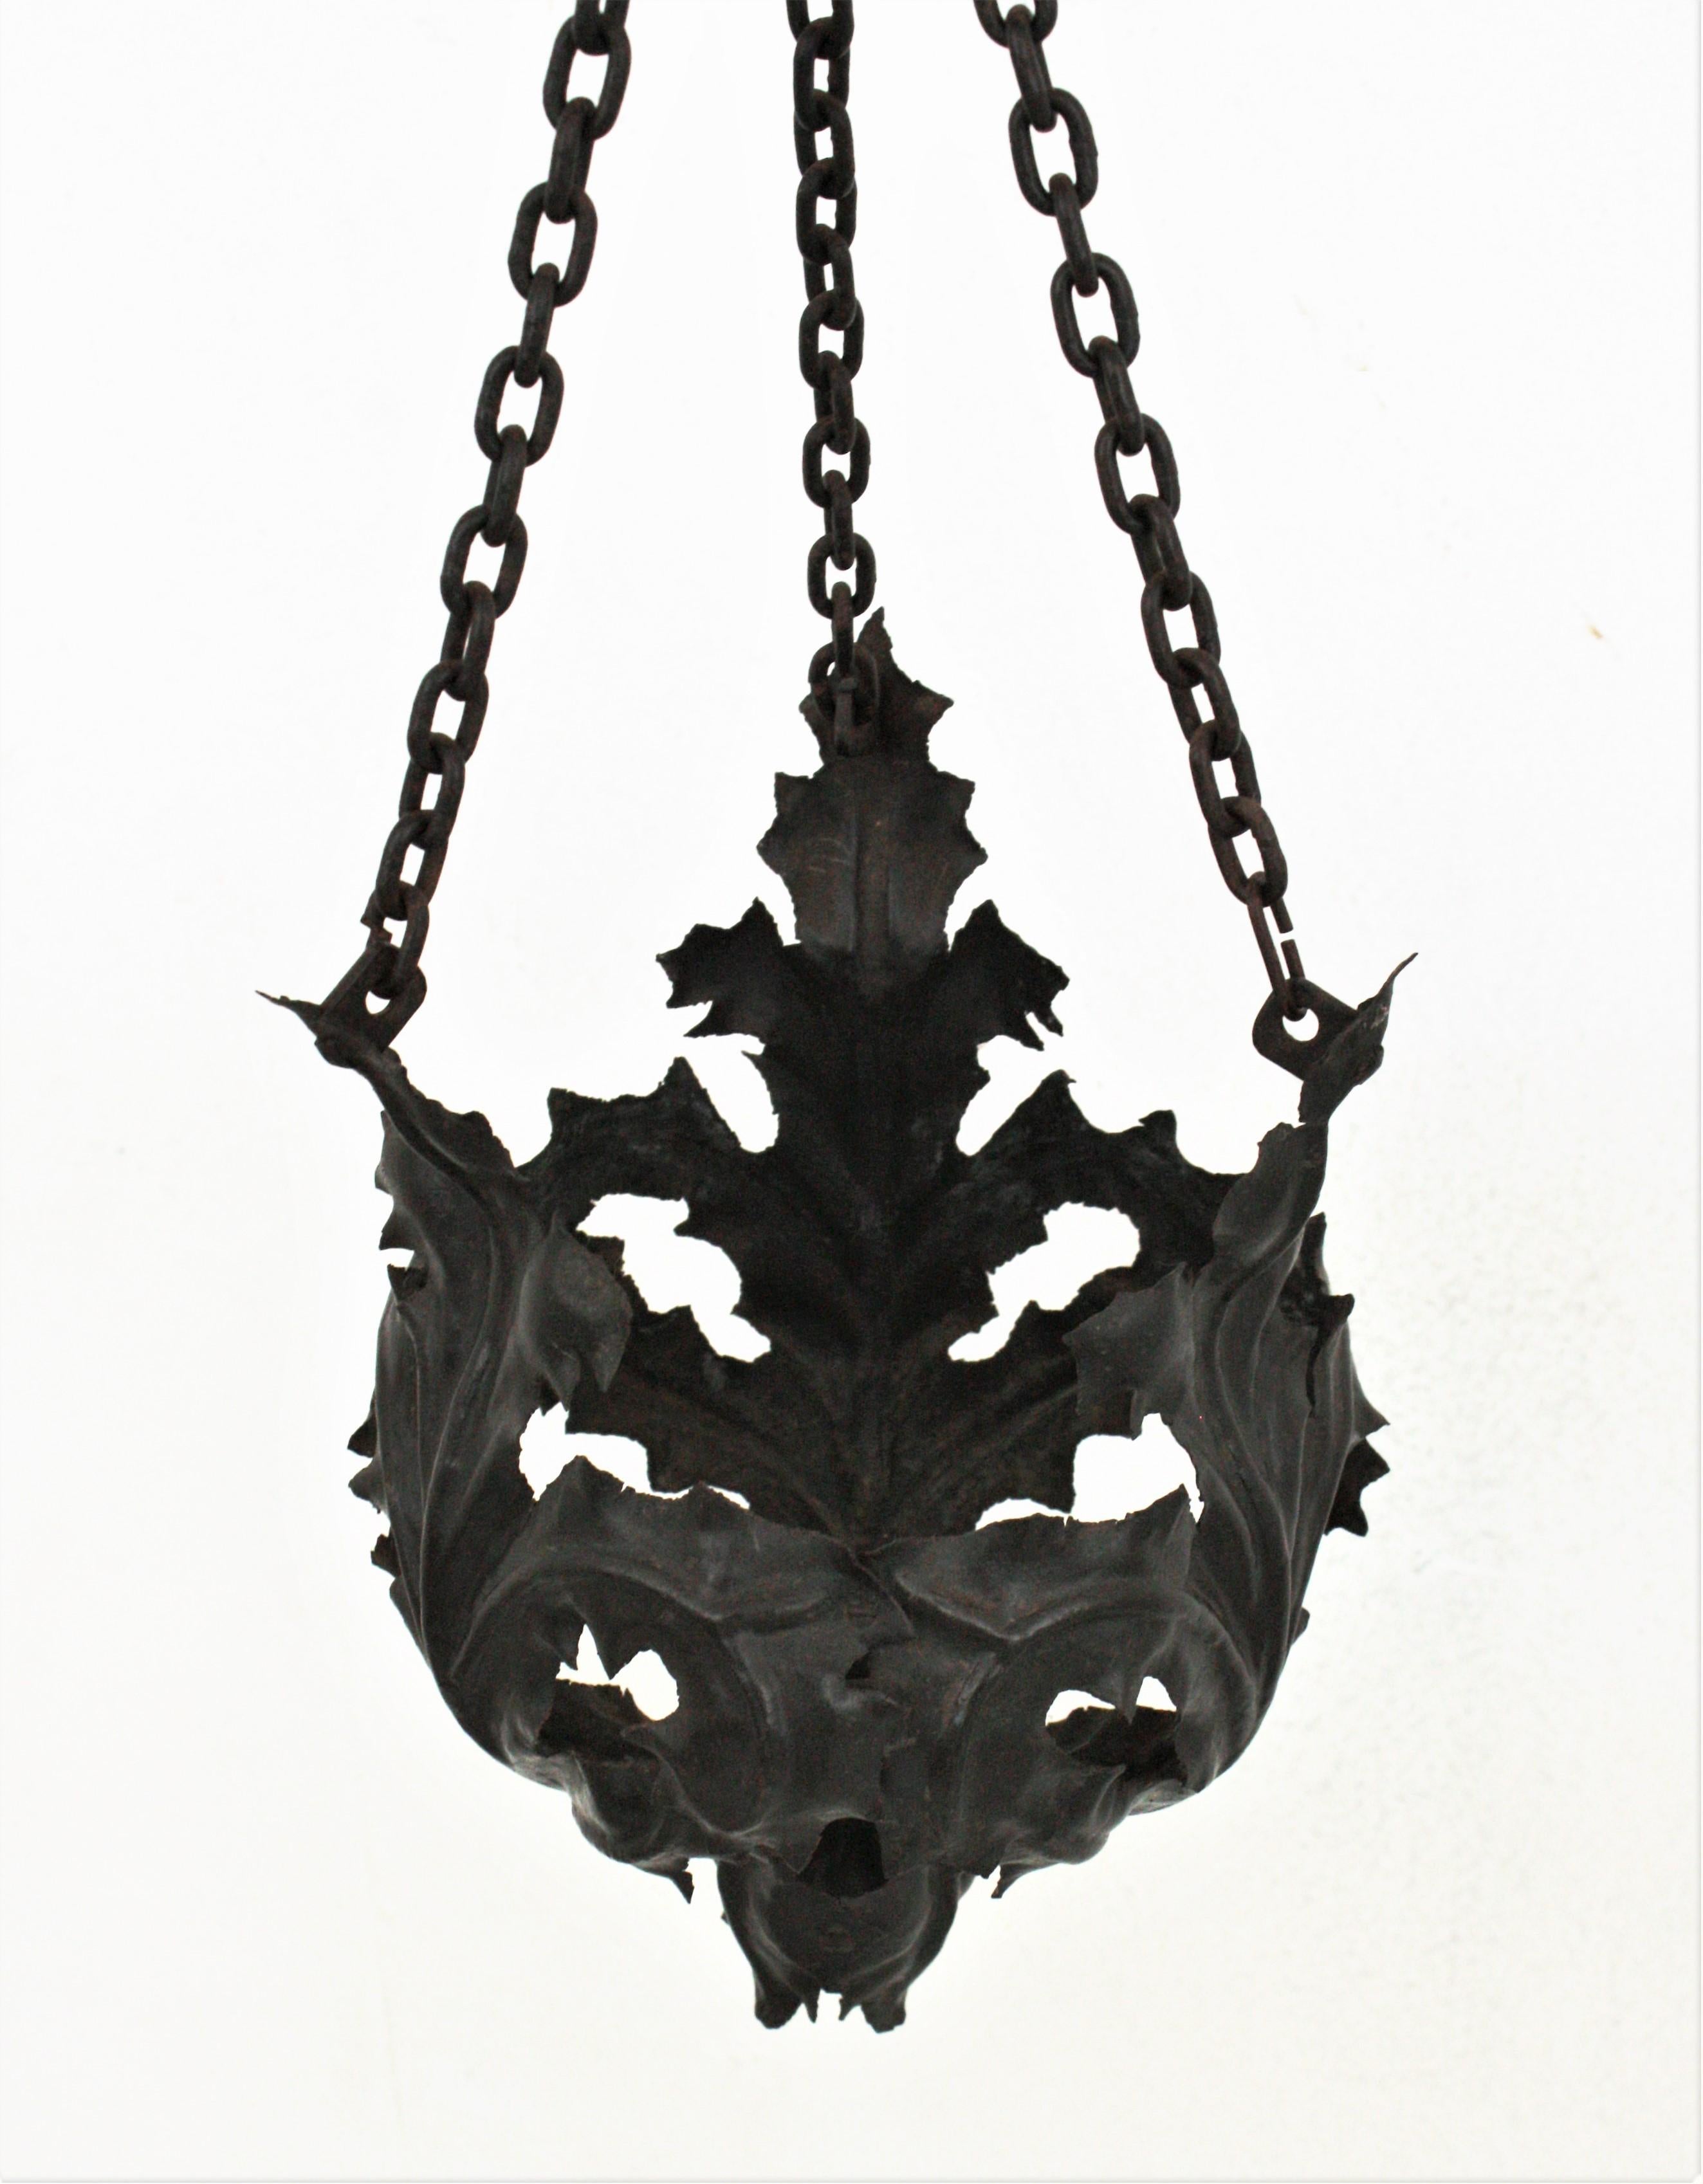 Hammered Spanish Wrought Iron Gothic Style Wall Hanging Planter with Foliage Motifs